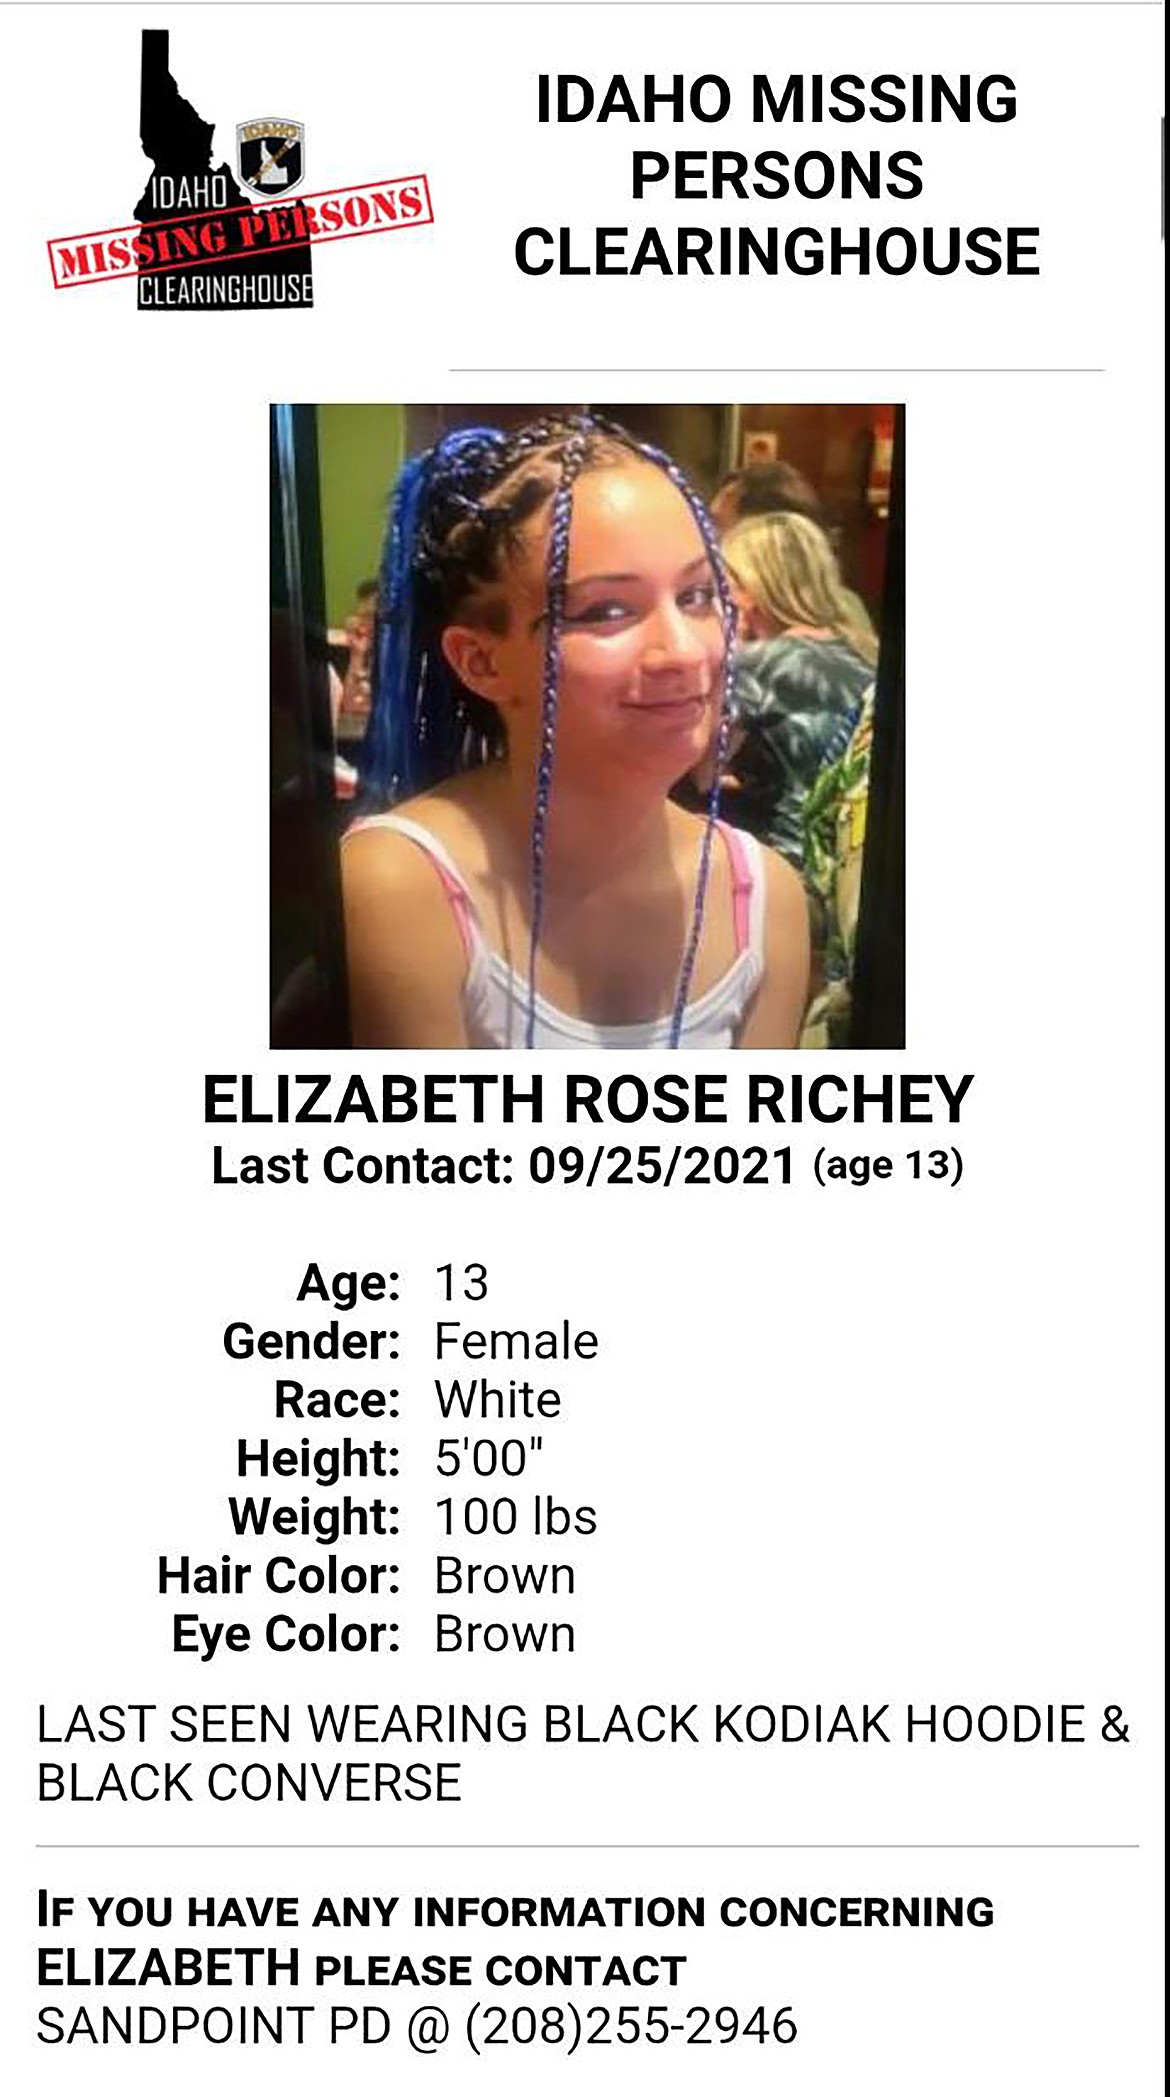 Detectives with the Sandpoint Police Department are asking for the public’s help in locating a missing 13-year old girl, Elizabeth “Rose” Richey.